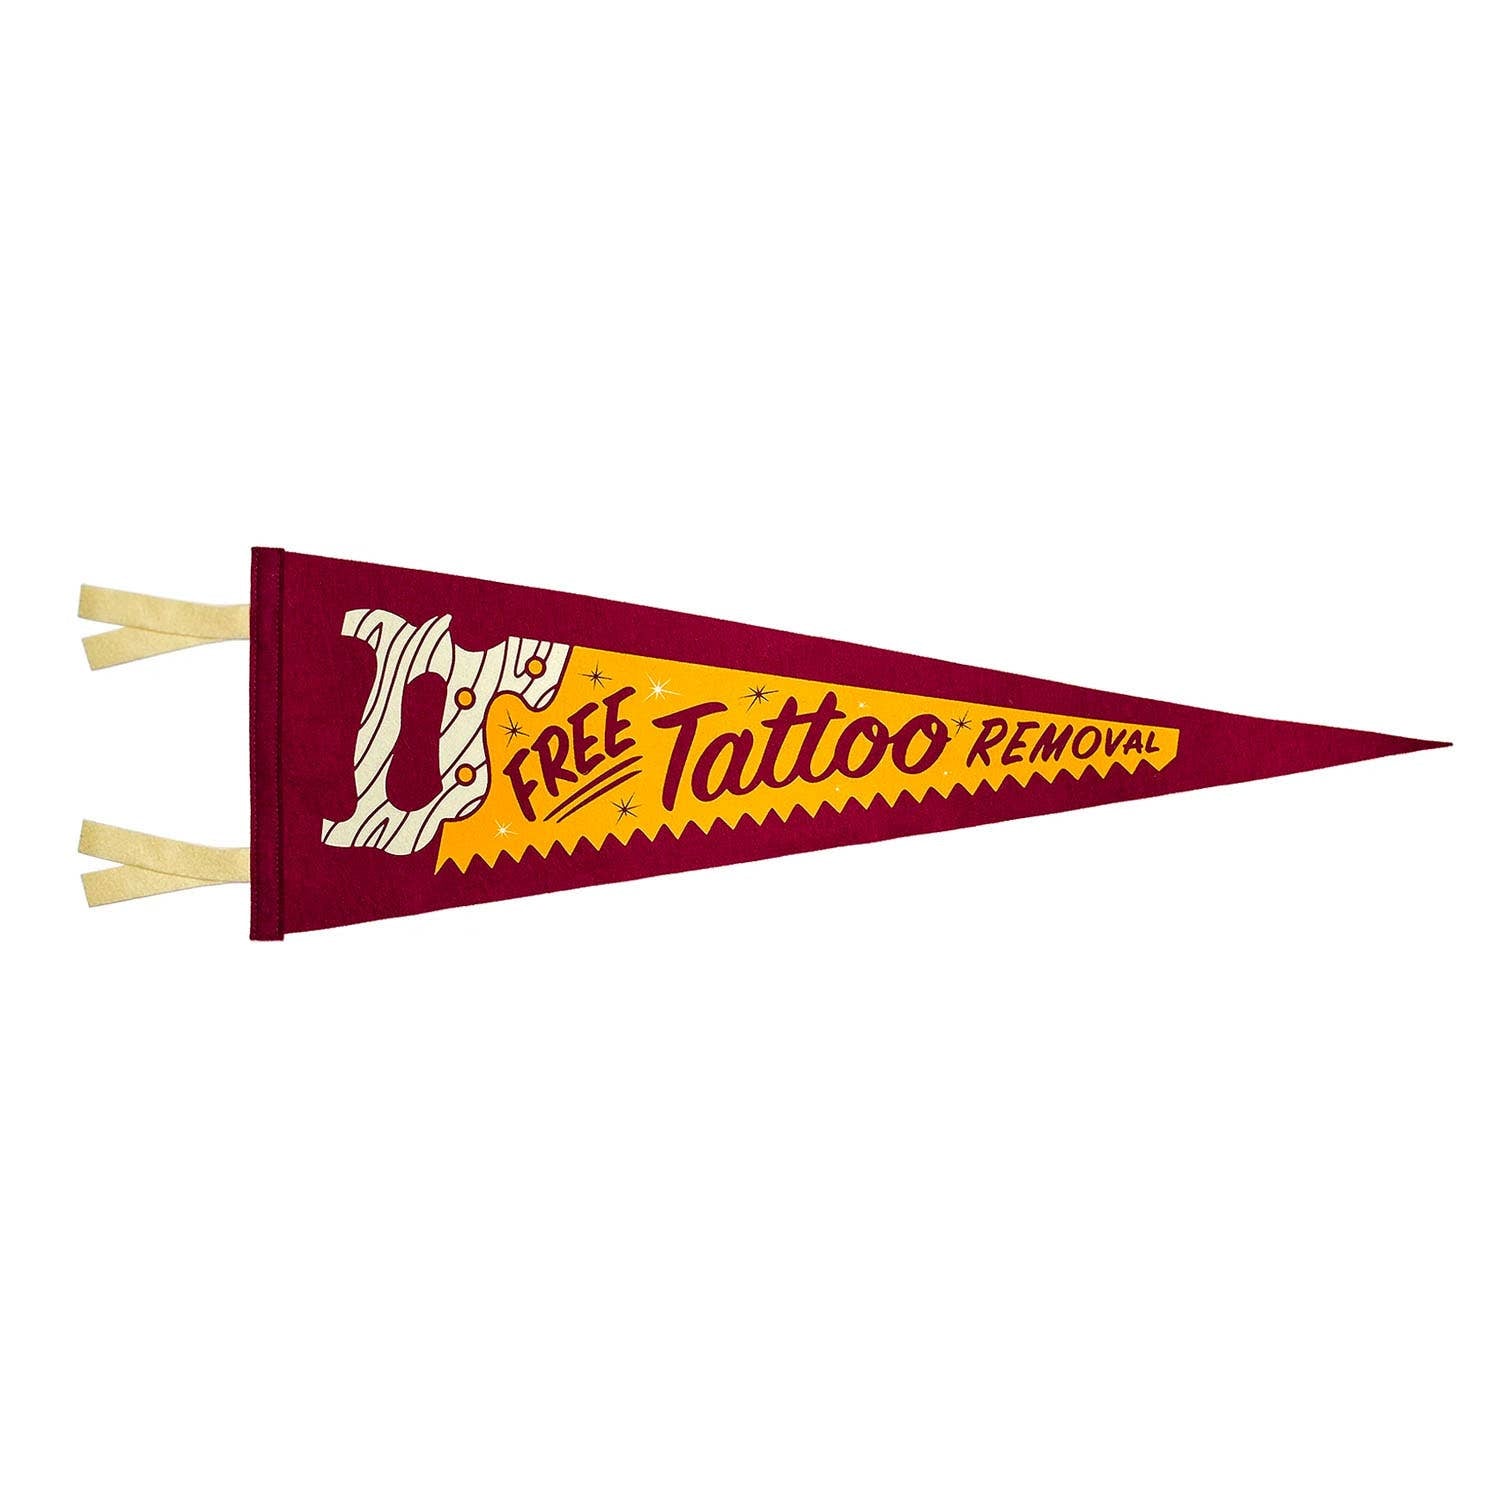 Oxford Pennant Free Tattoo Removal Pennant